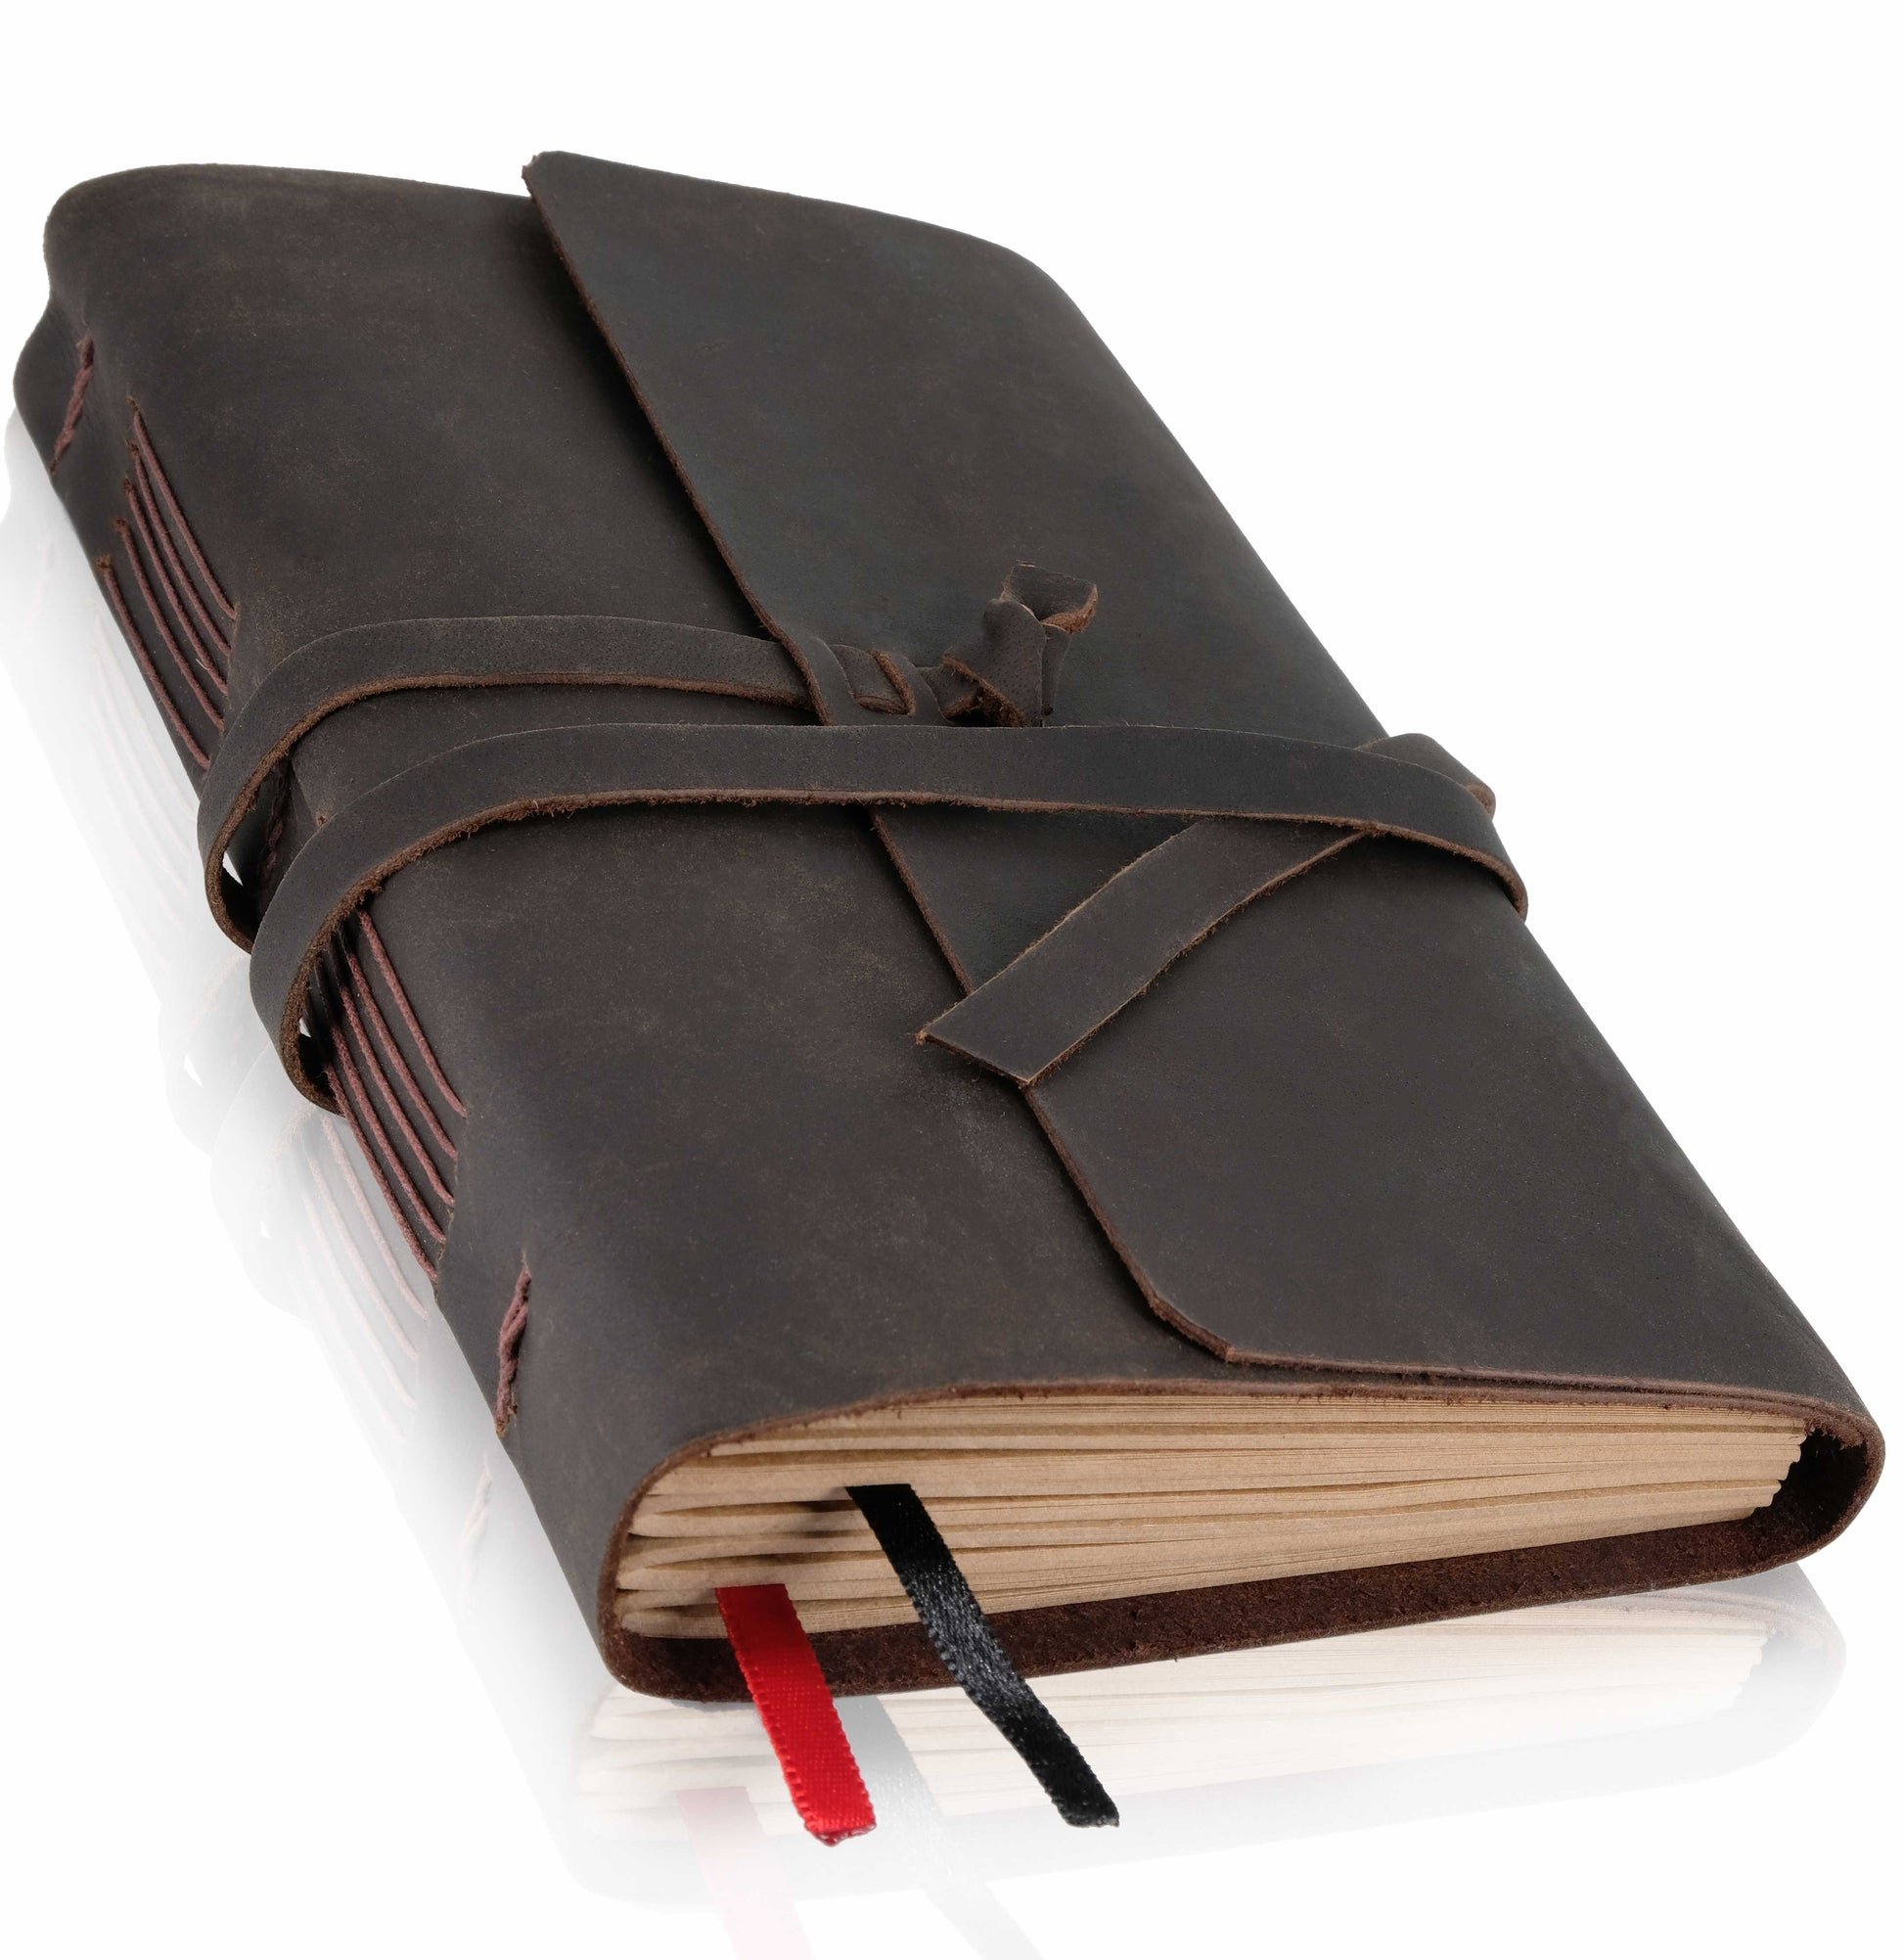 Vegan Leather Journal Lined Pages- Pen Holder Secures The Diary